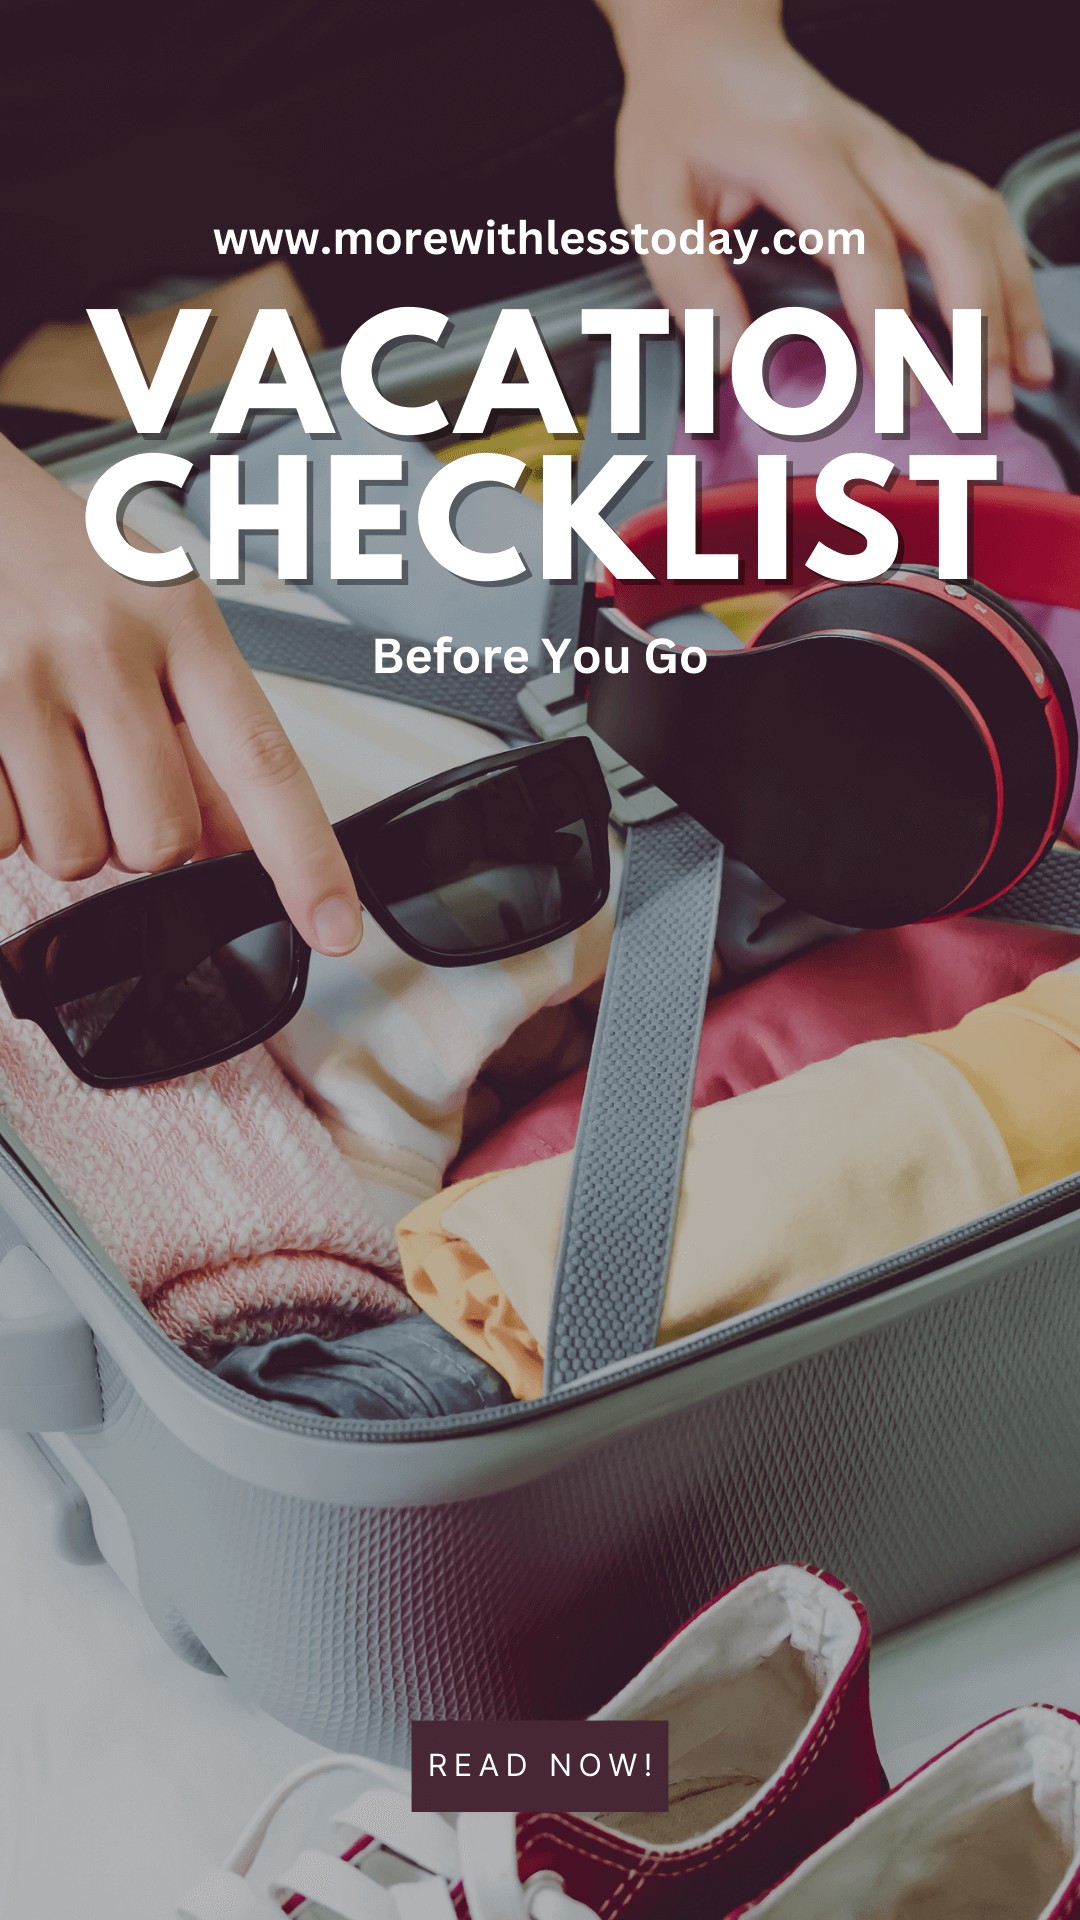 Vacation Checklist Before You Go - PIN